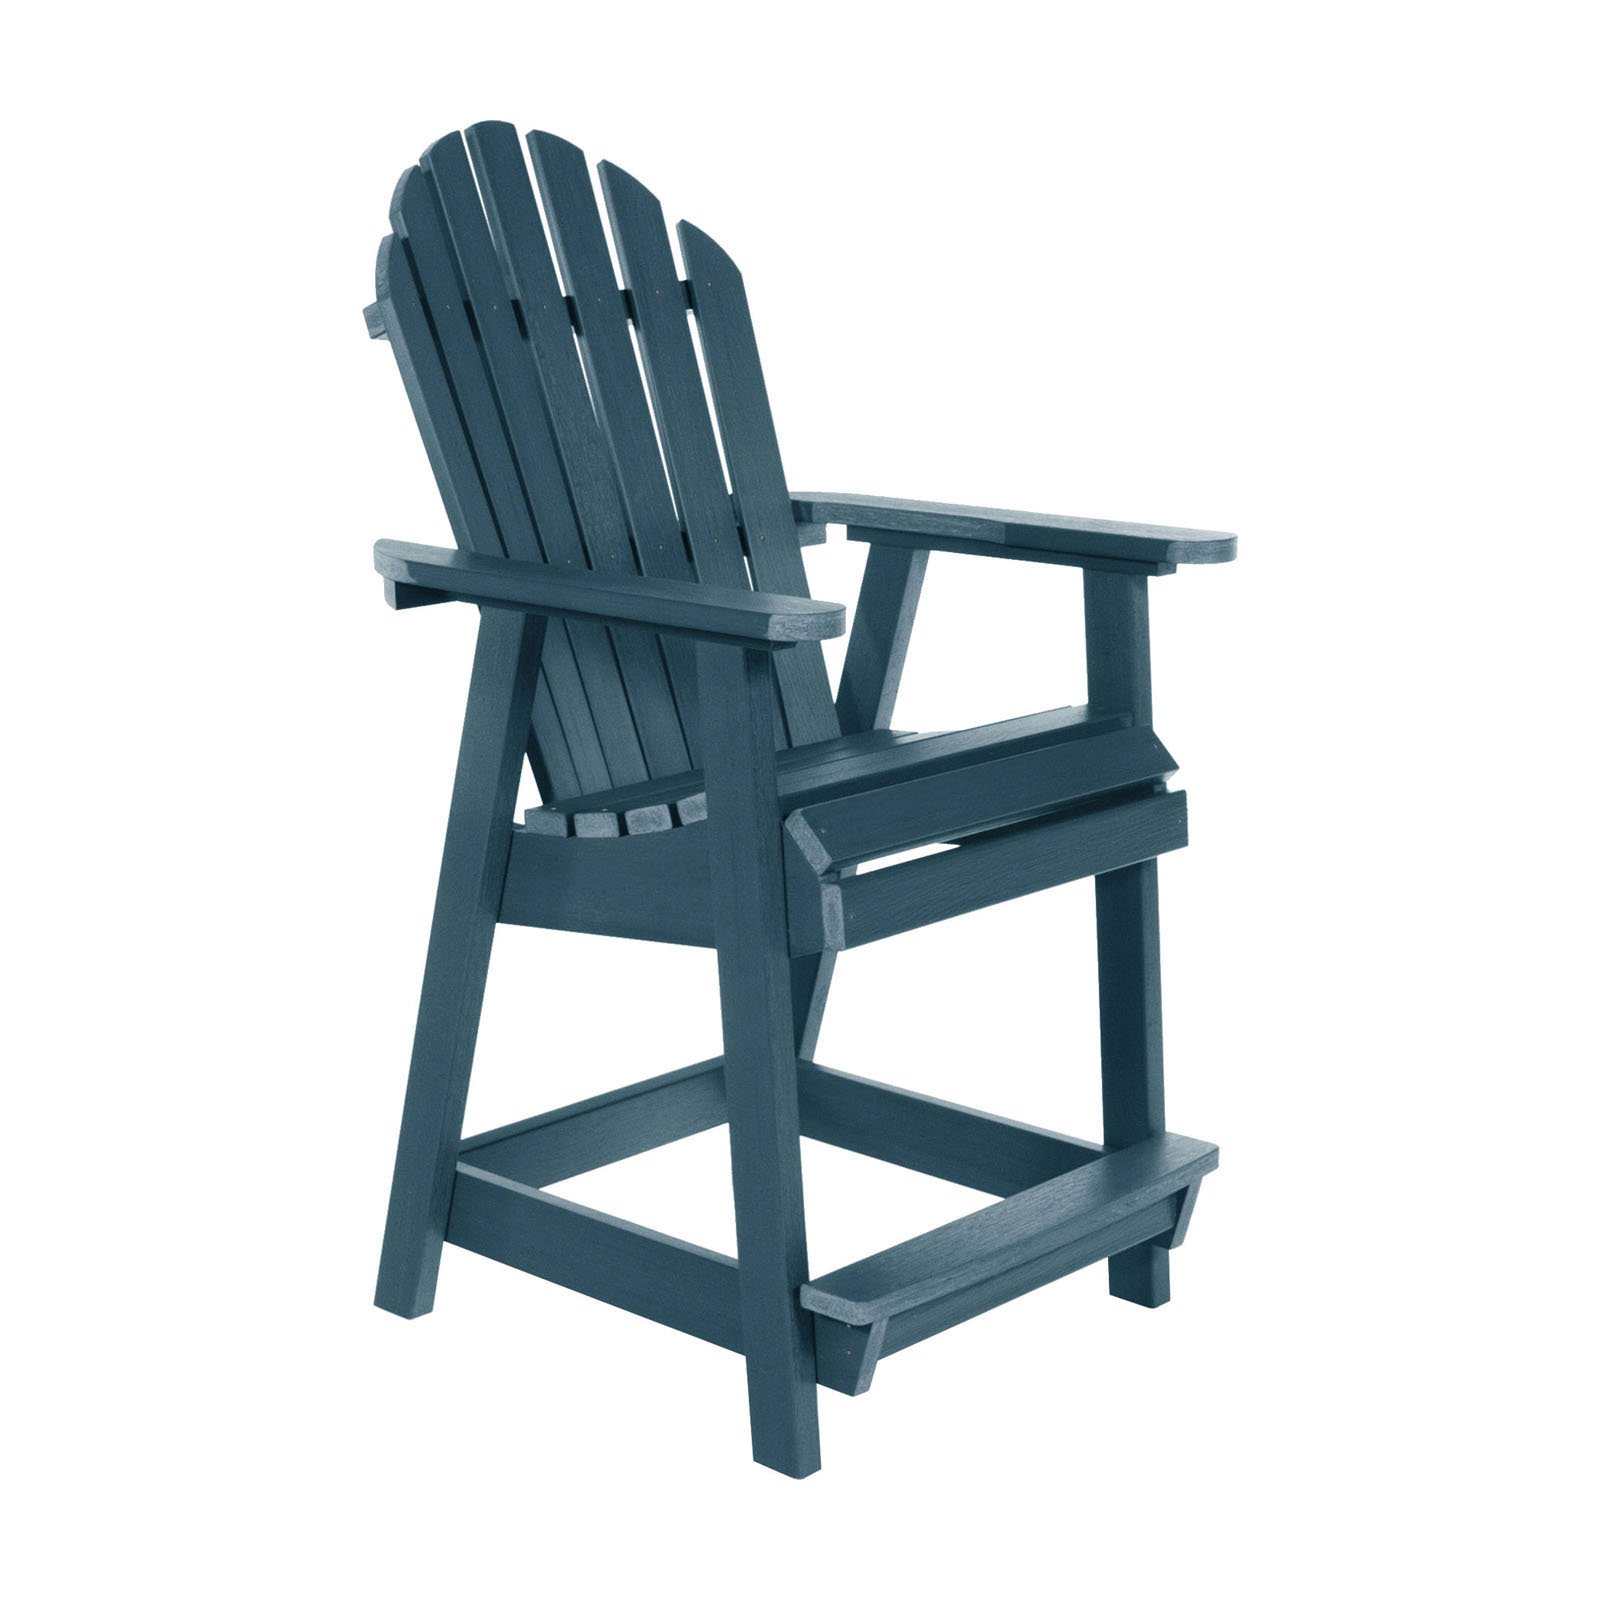 The Sequoia Professional Commercial Grade Muskoka Adirondack Deck Dining Chair in Counter Height - image 1 of 2